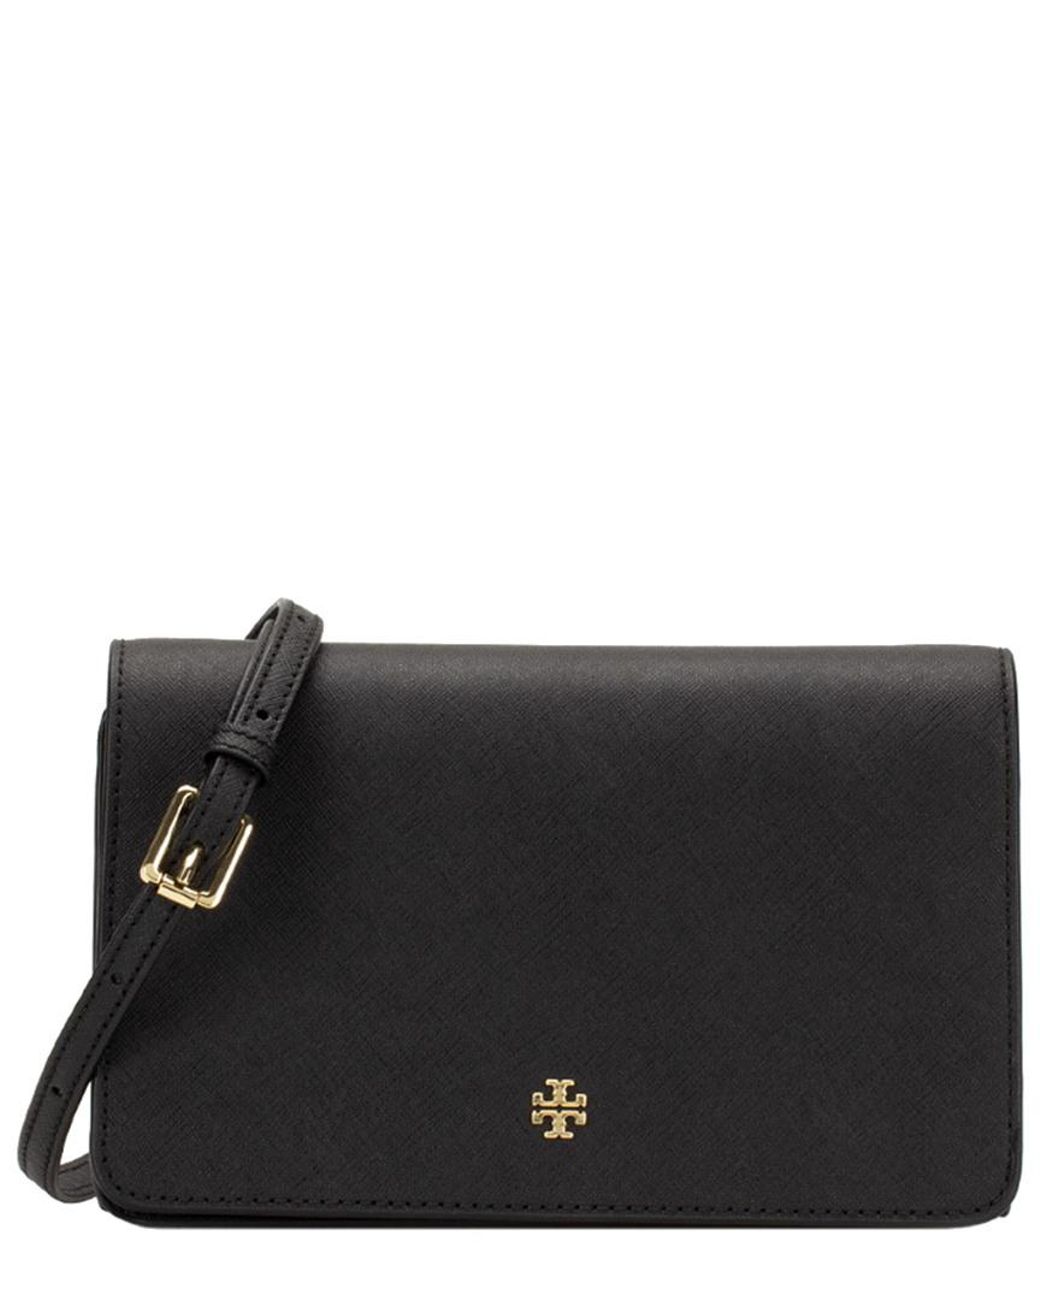 Tory Burch Emerson Combo Leather Crossbody in Black | Lyst UK